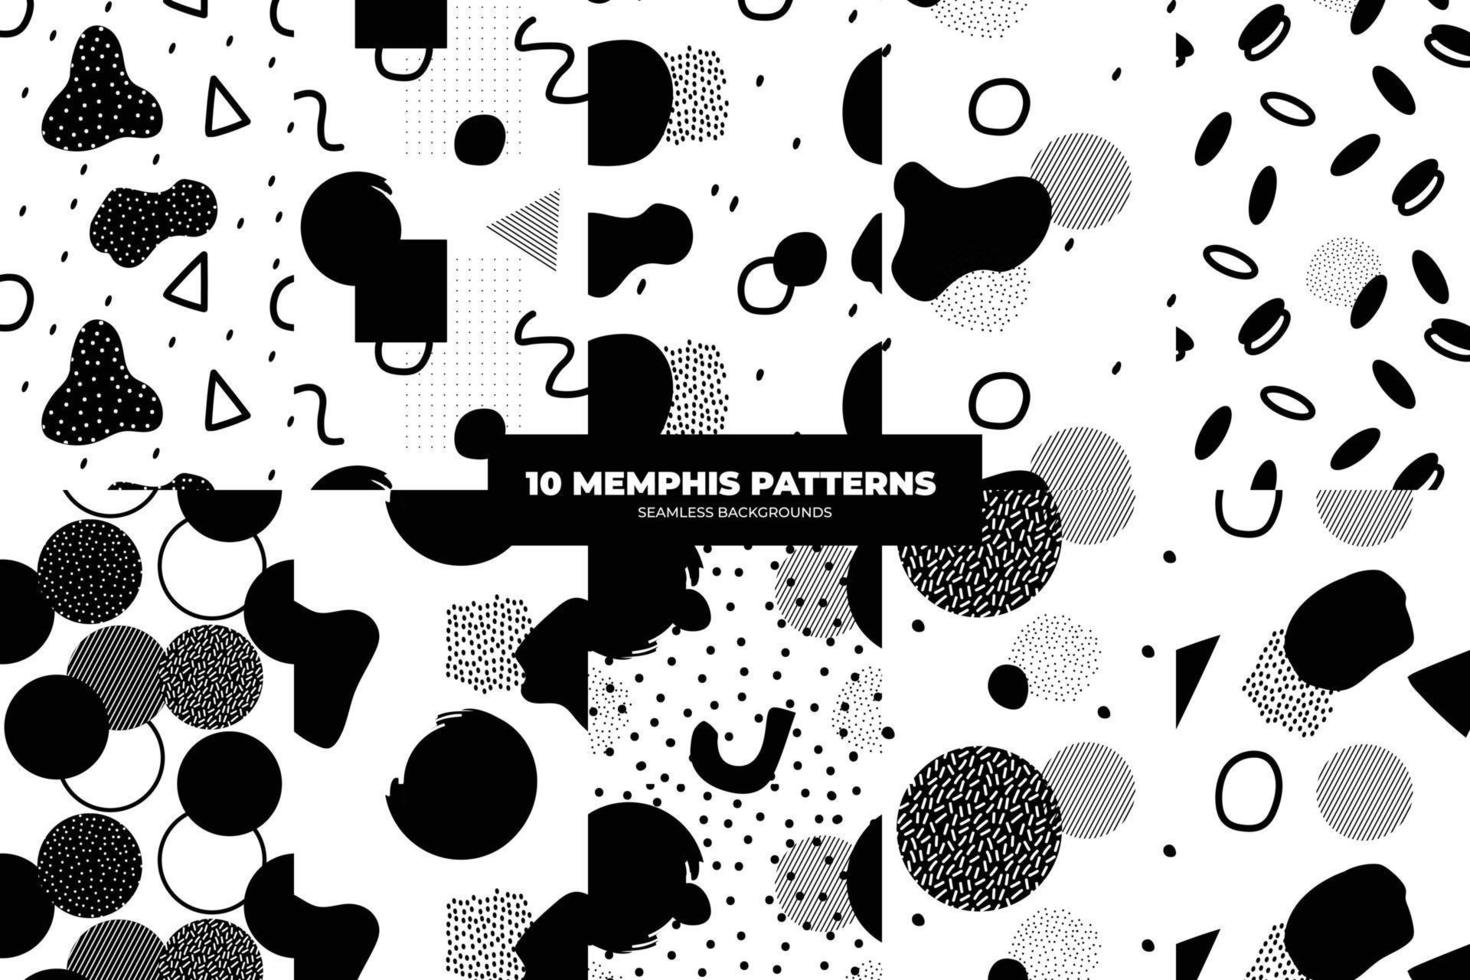 Set of Memphis Pattern. Black, white, grey colors. Memphis Style Funky Patterns. Hipster Style 80s-90s. Vector illustration. Suitable for banners, funky posters, flyers, covers.